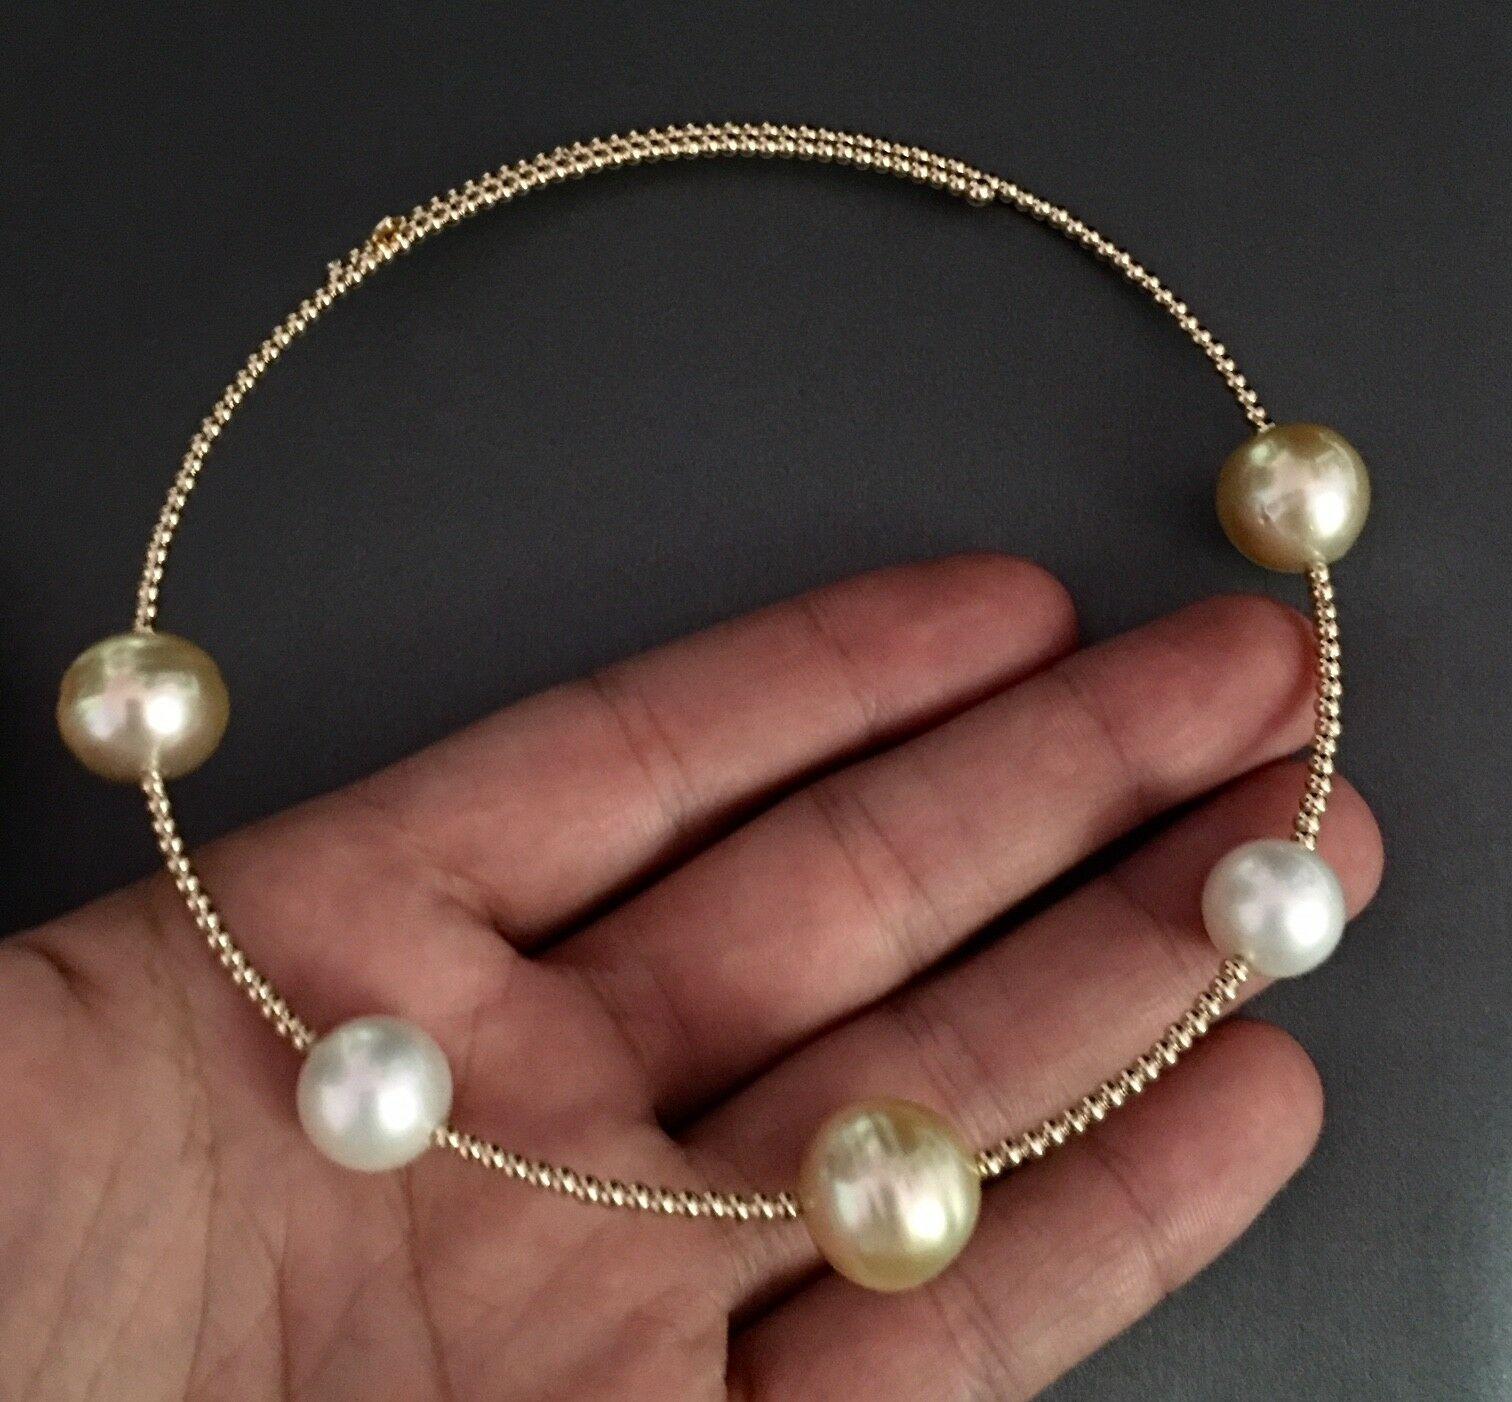 Golden South Sea Pearl Necklace 14k Gold Italy Italy Certified 3